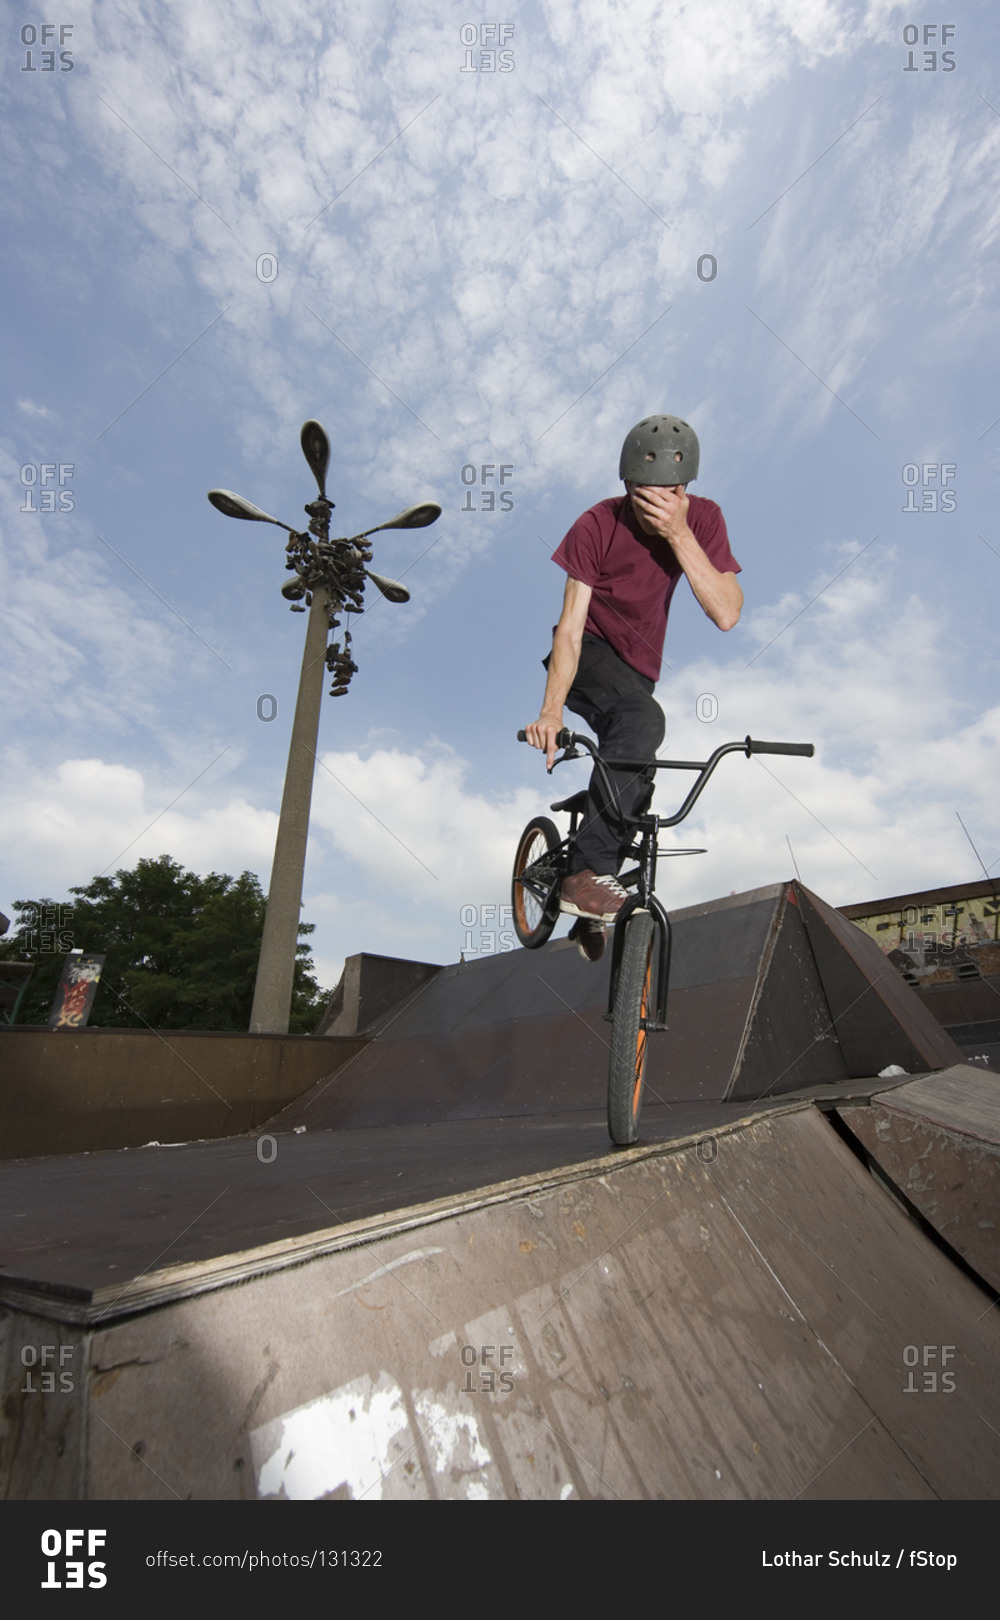 A young man balancing on a BMX bike at the top of a ramp